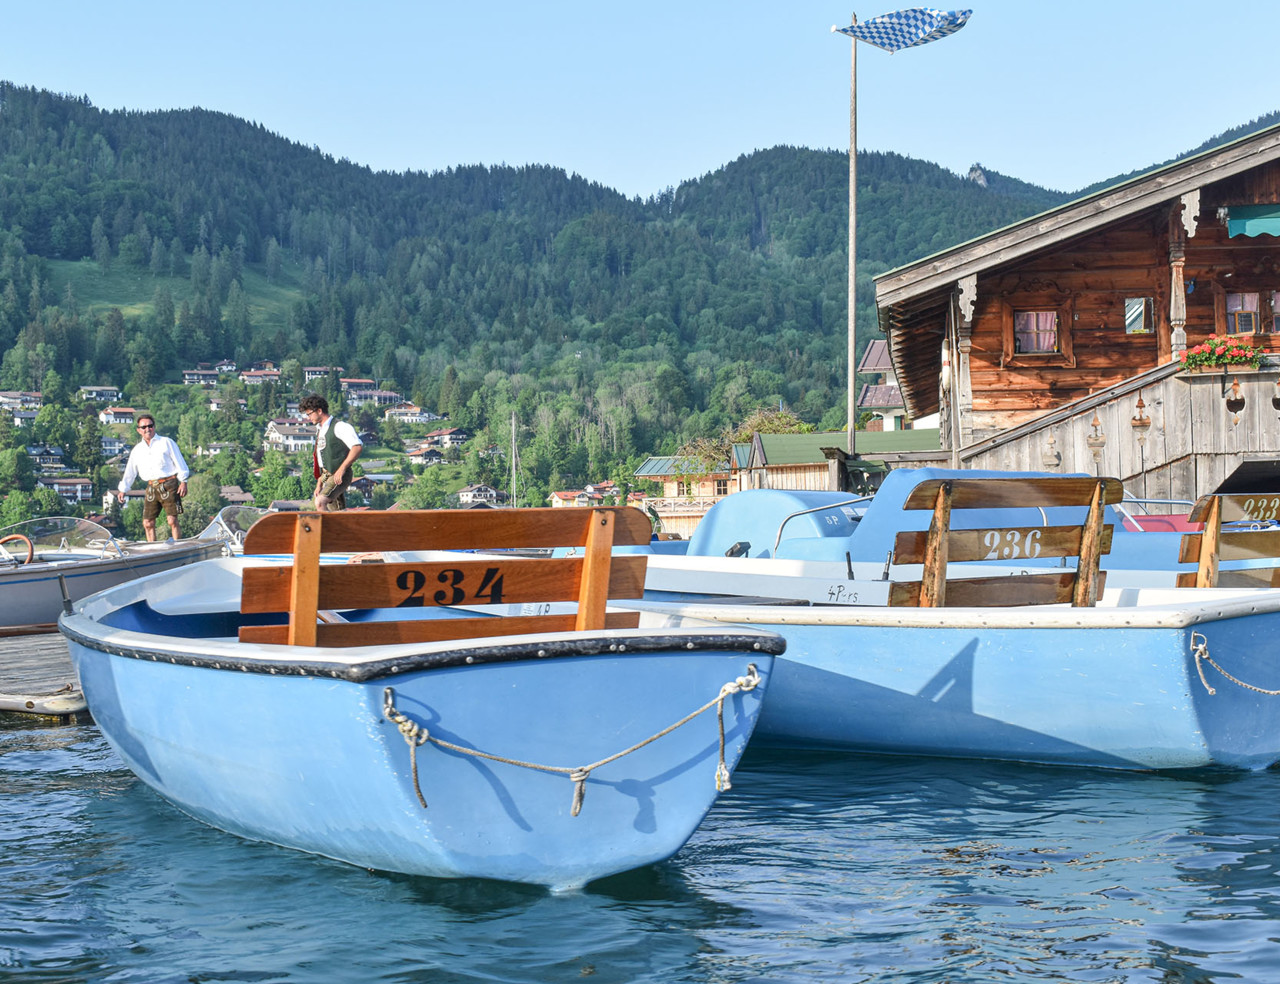 Our paddleboats on Lake Tegernsee